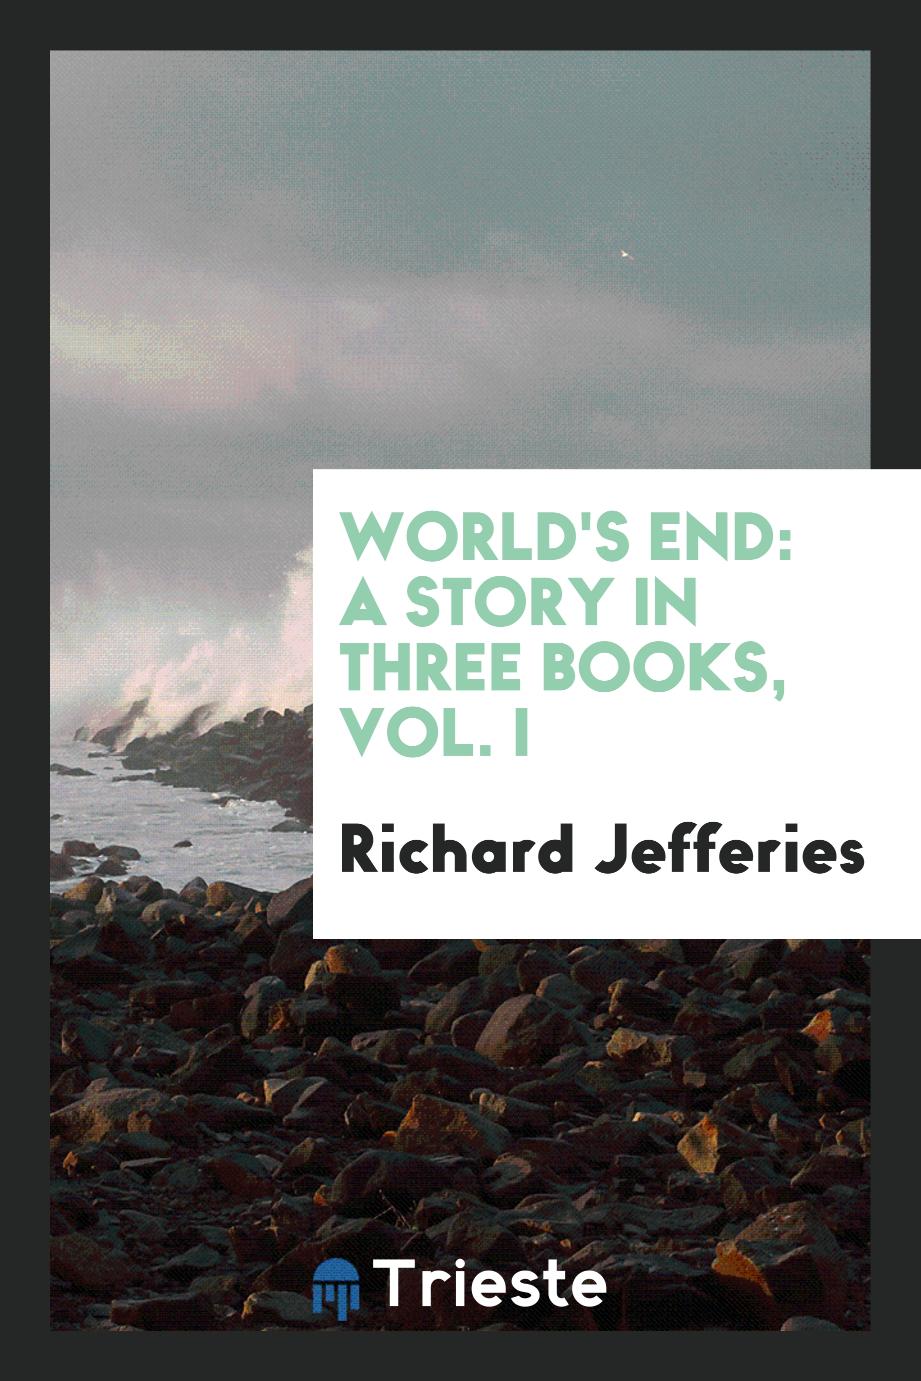 World's end: A Story in Three Books, Vol. I